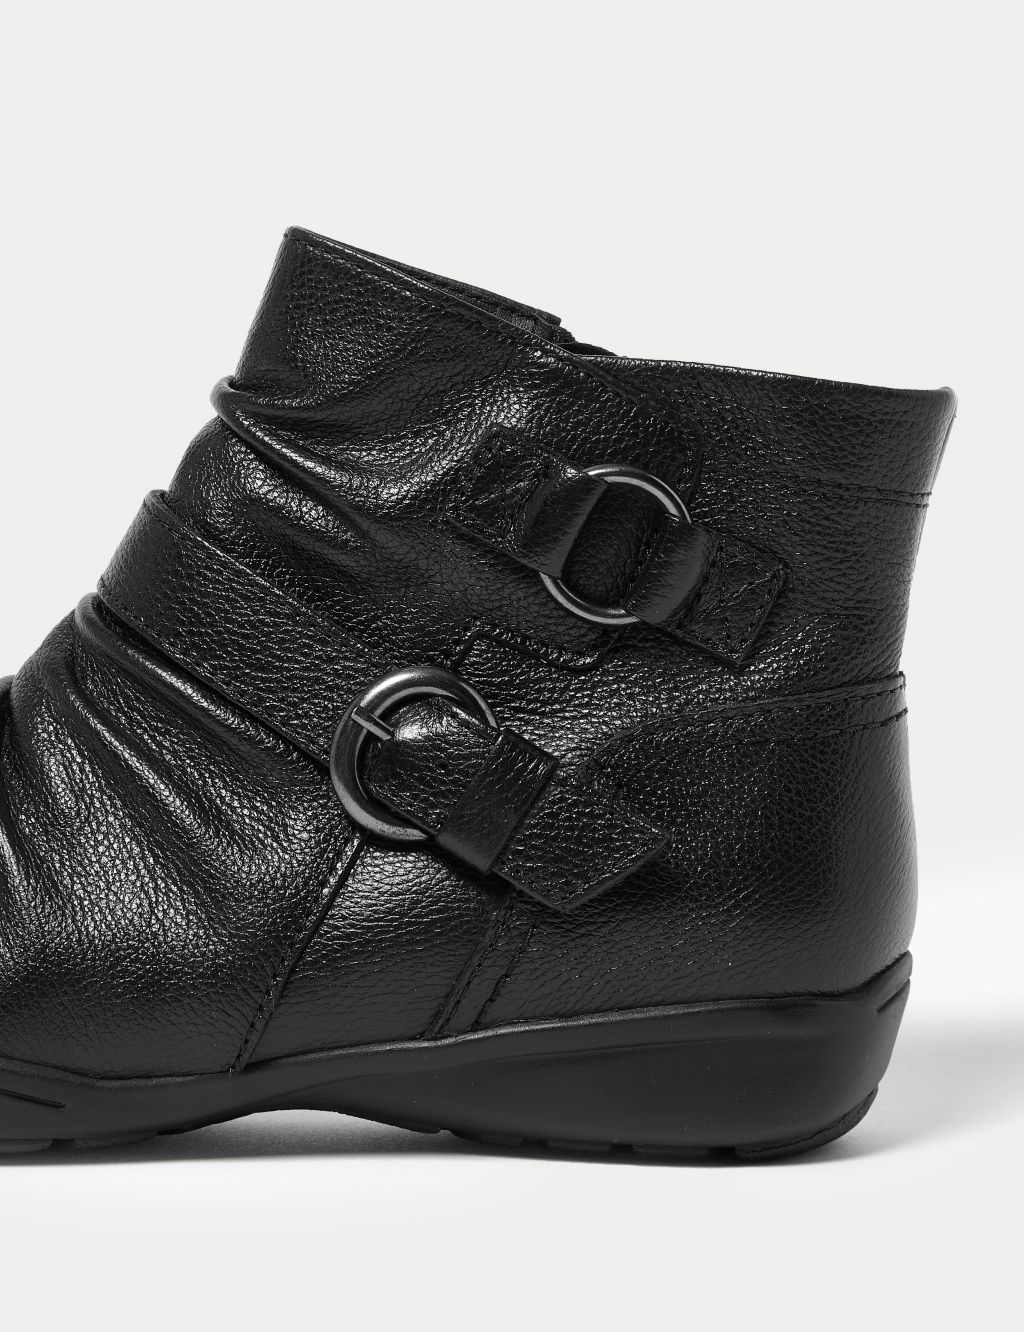 Wide Fit Leather Buckle Ruched Ankle Boots image 5